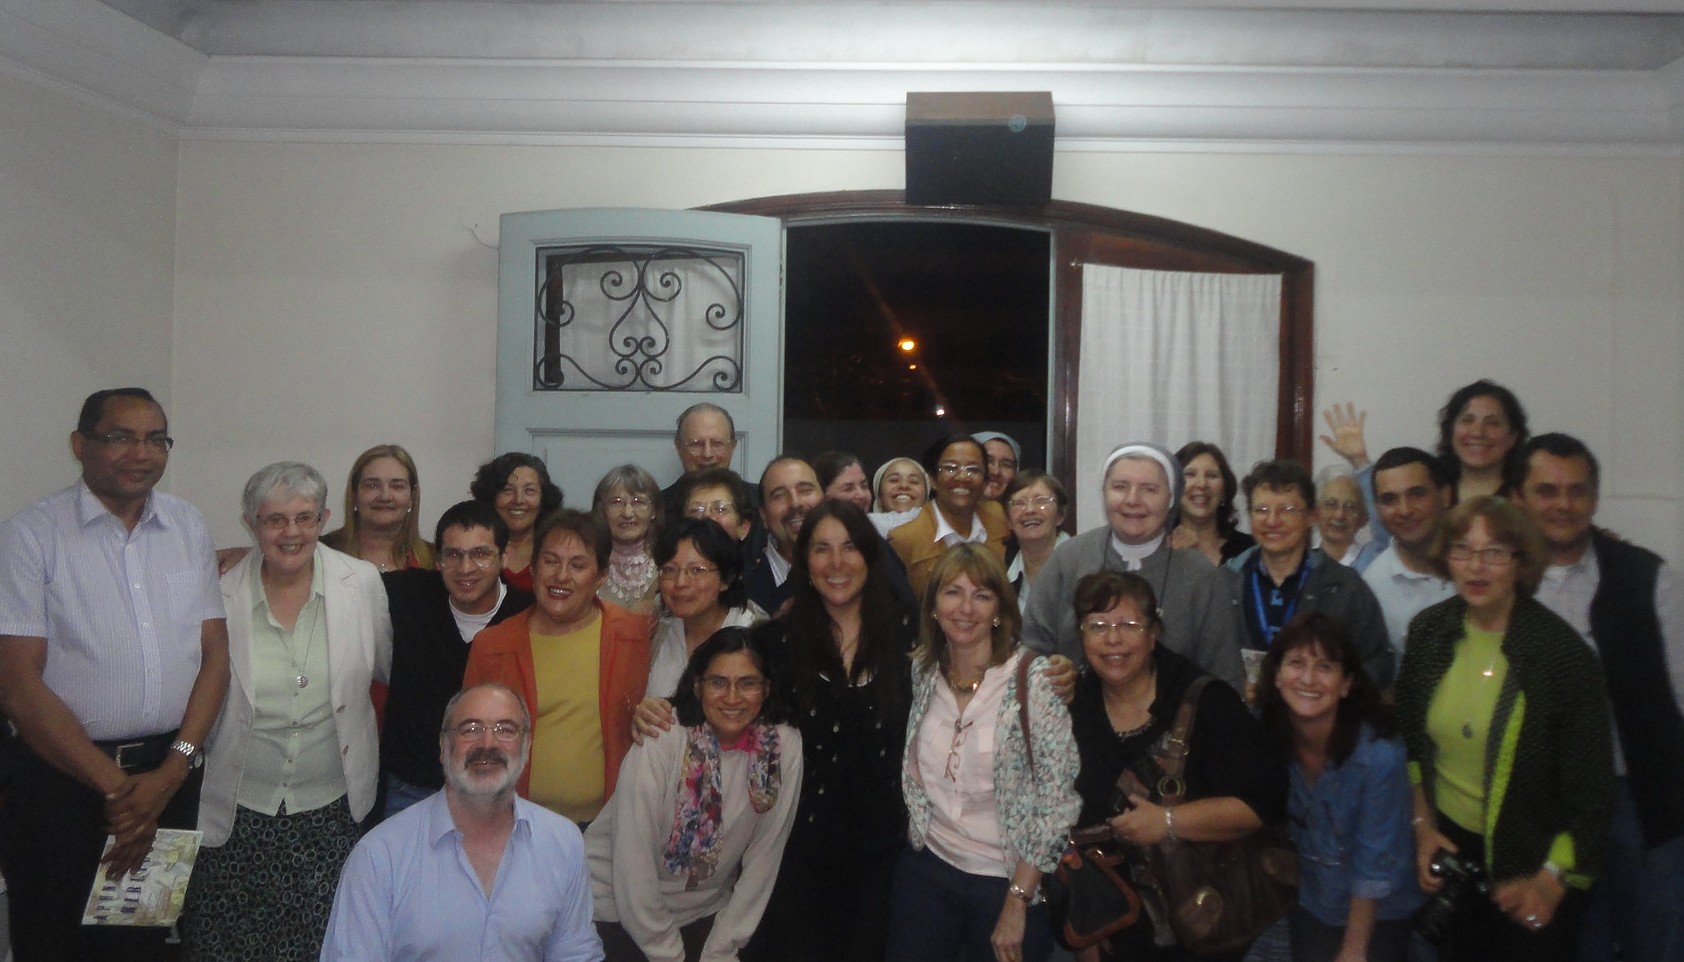 Buenos Aires Sion Biblical Center starts monthly meetings next week.